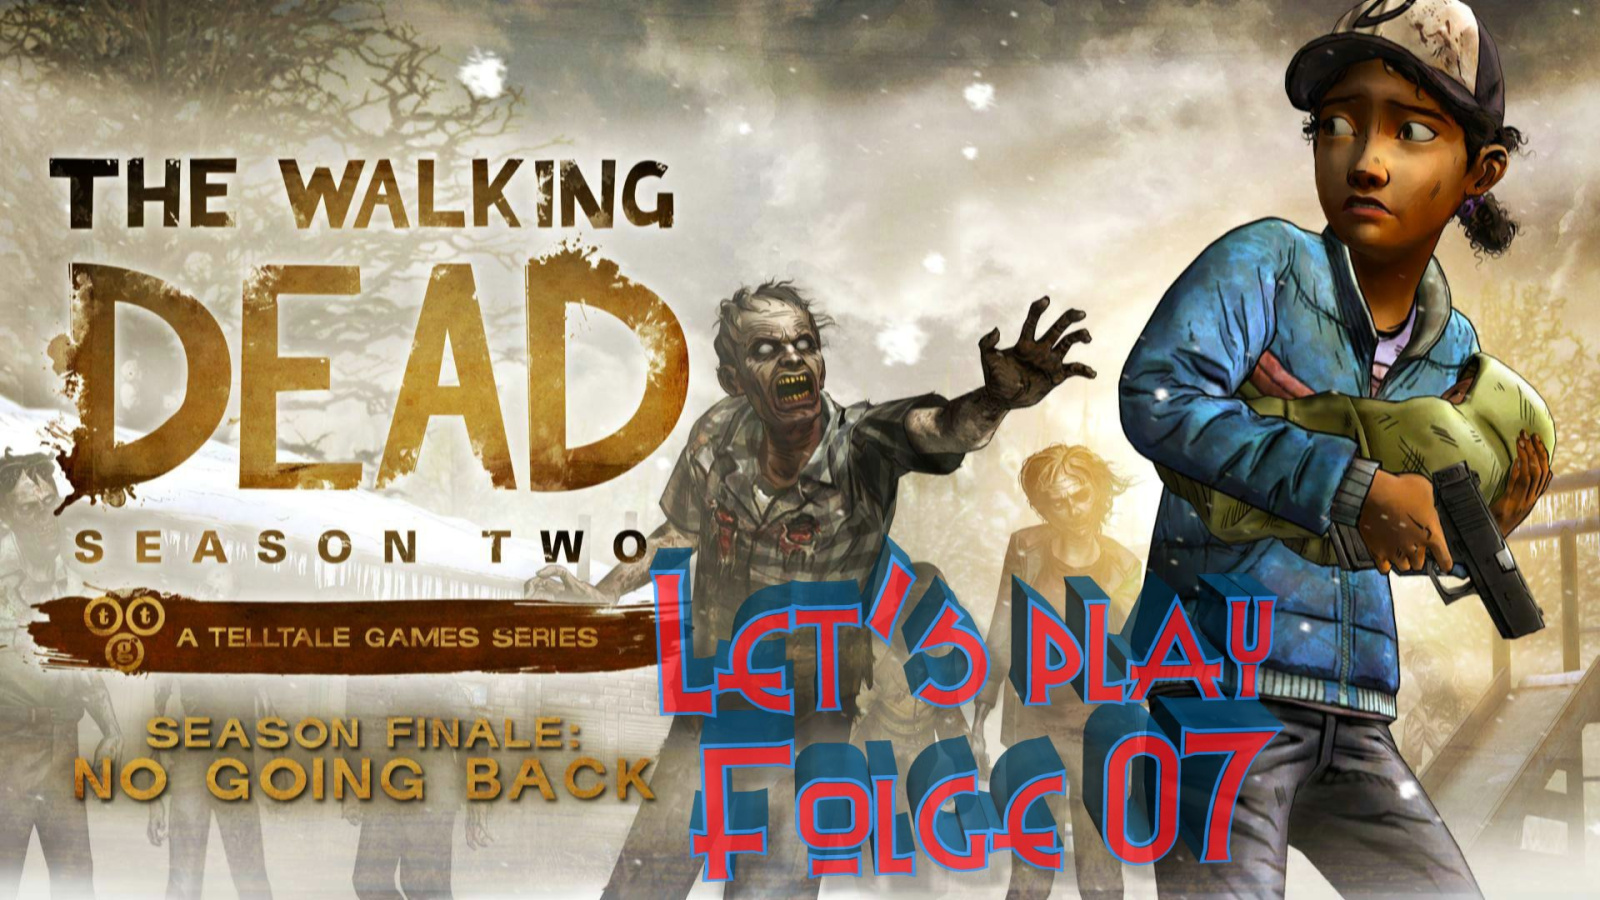 The Walking Dead: No Going Back – Let’s play 07